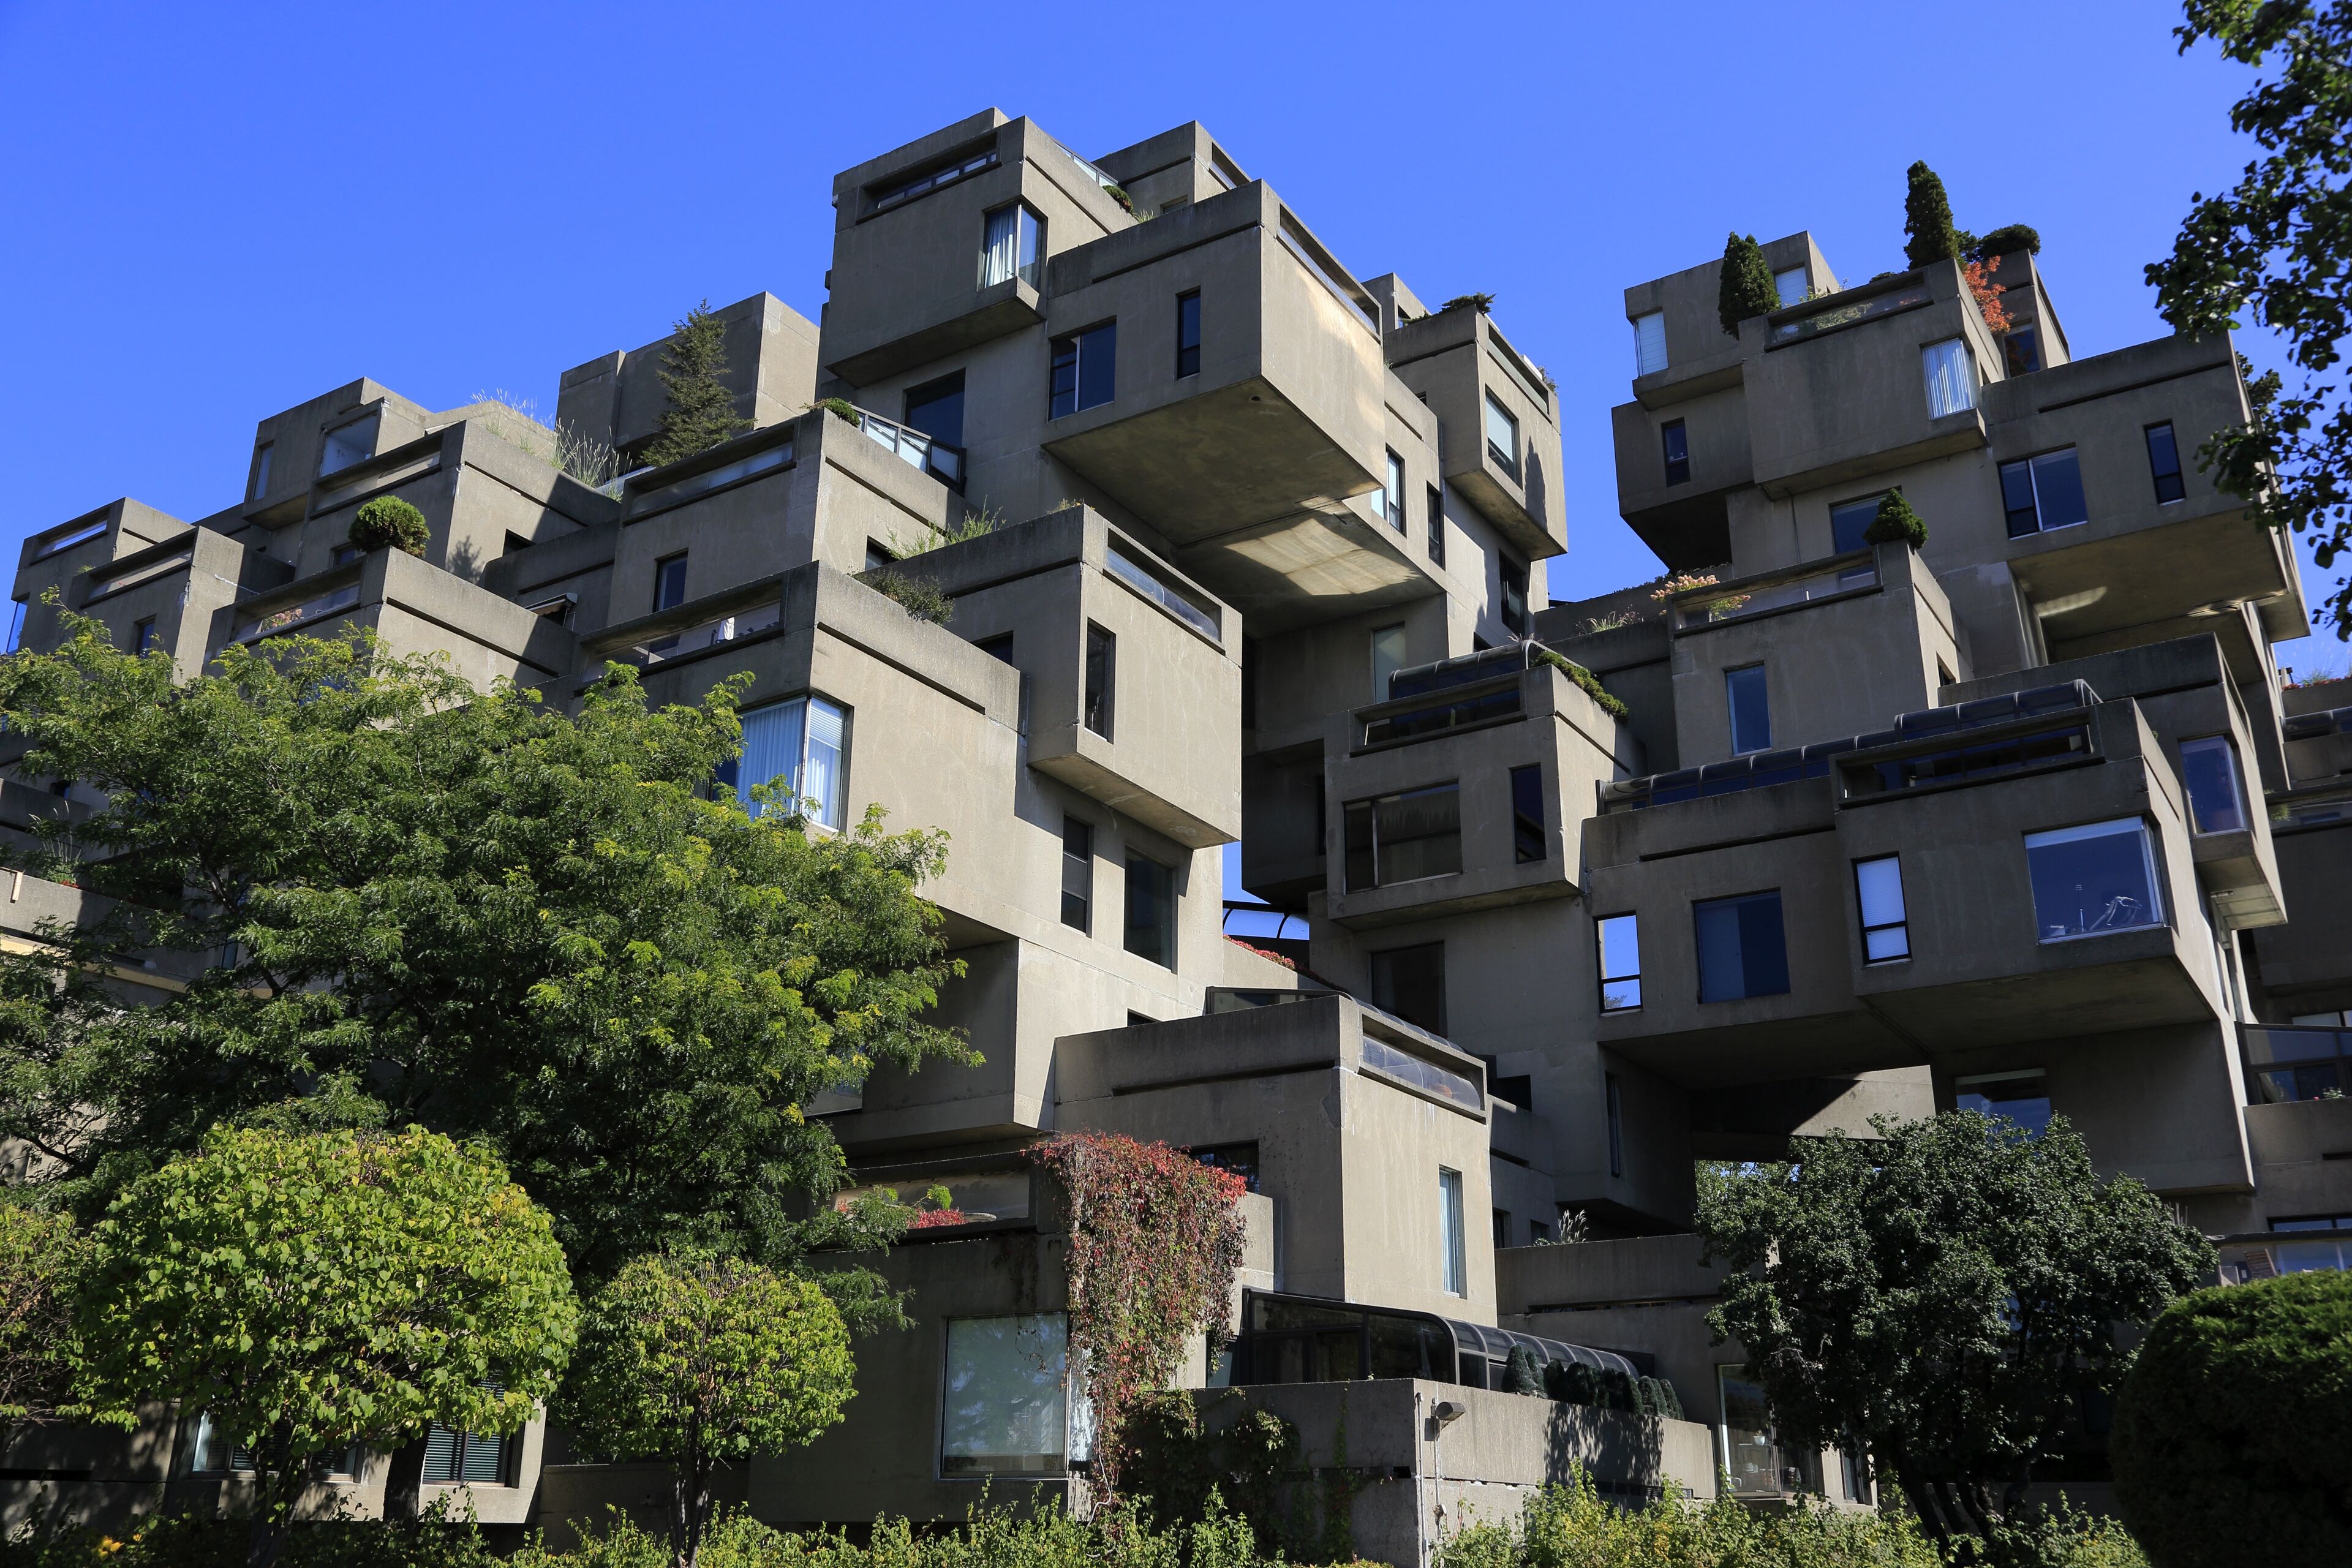 An image featuring a unique modular architectural complex with cubic structures against a clear blue sky, surrounded by lush greenery.